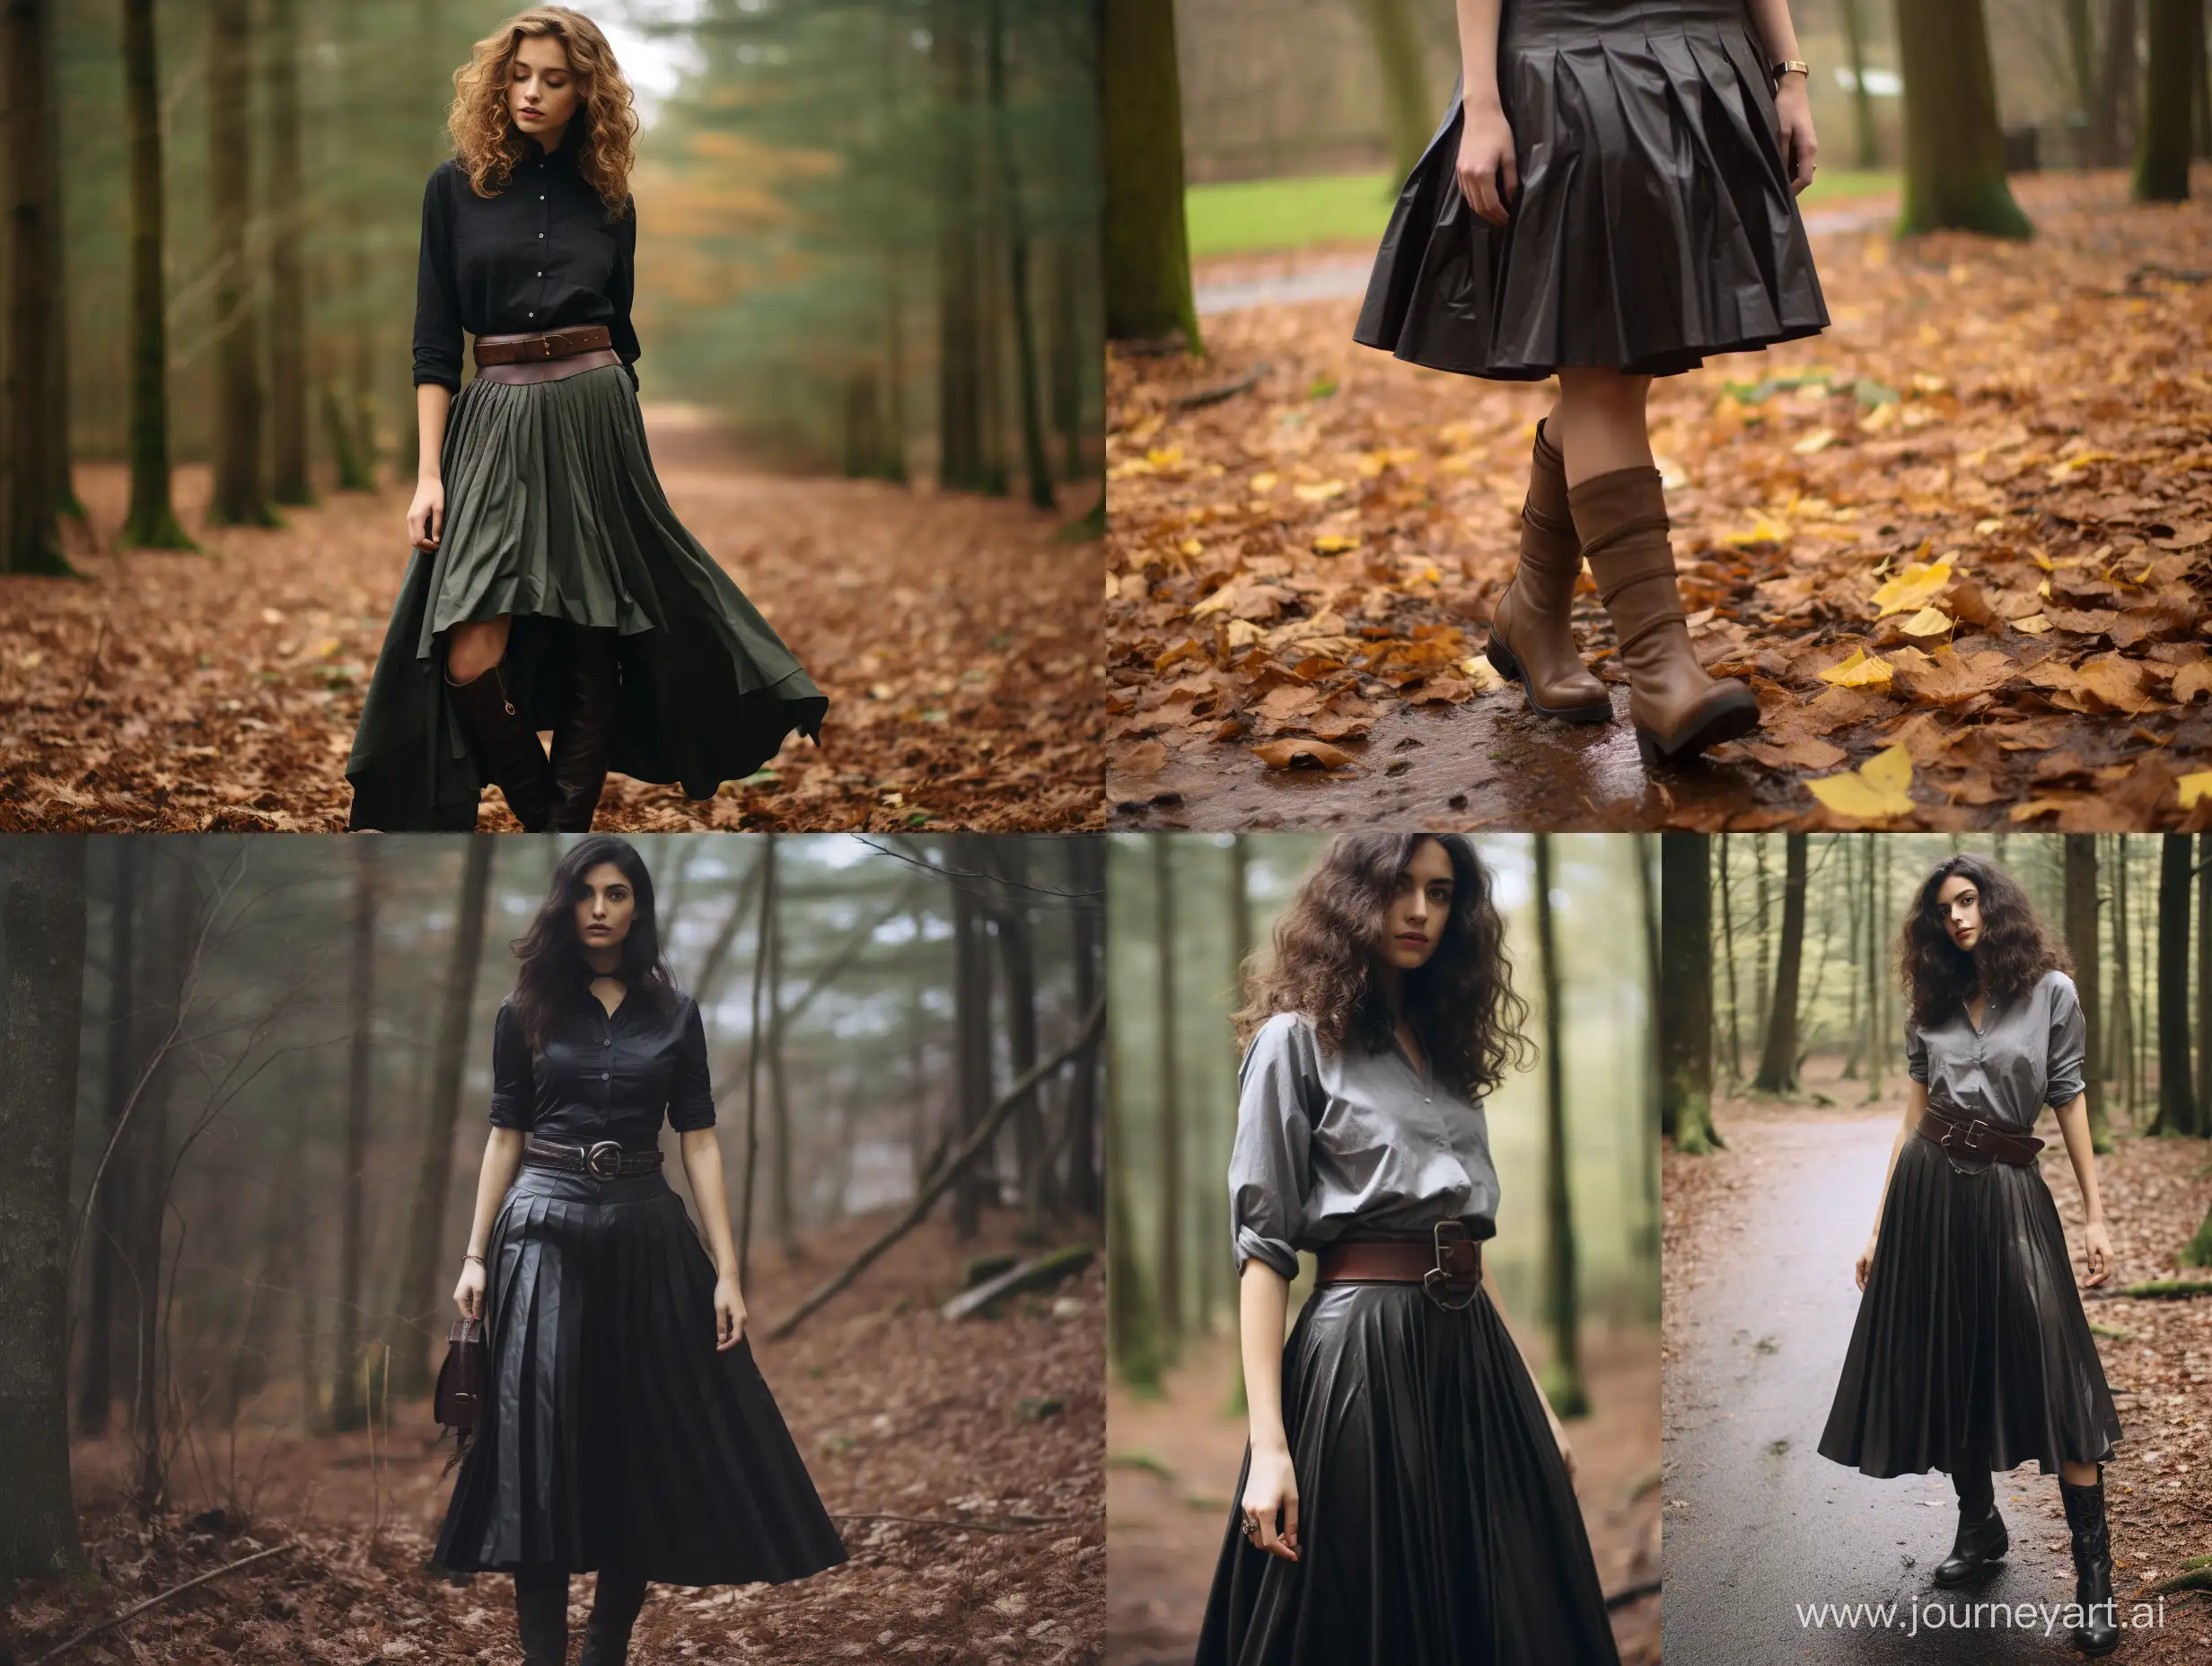 Fashionable-Leather-Boots-and-Skirt-Ensemble-in-43-Aspect-Ratio